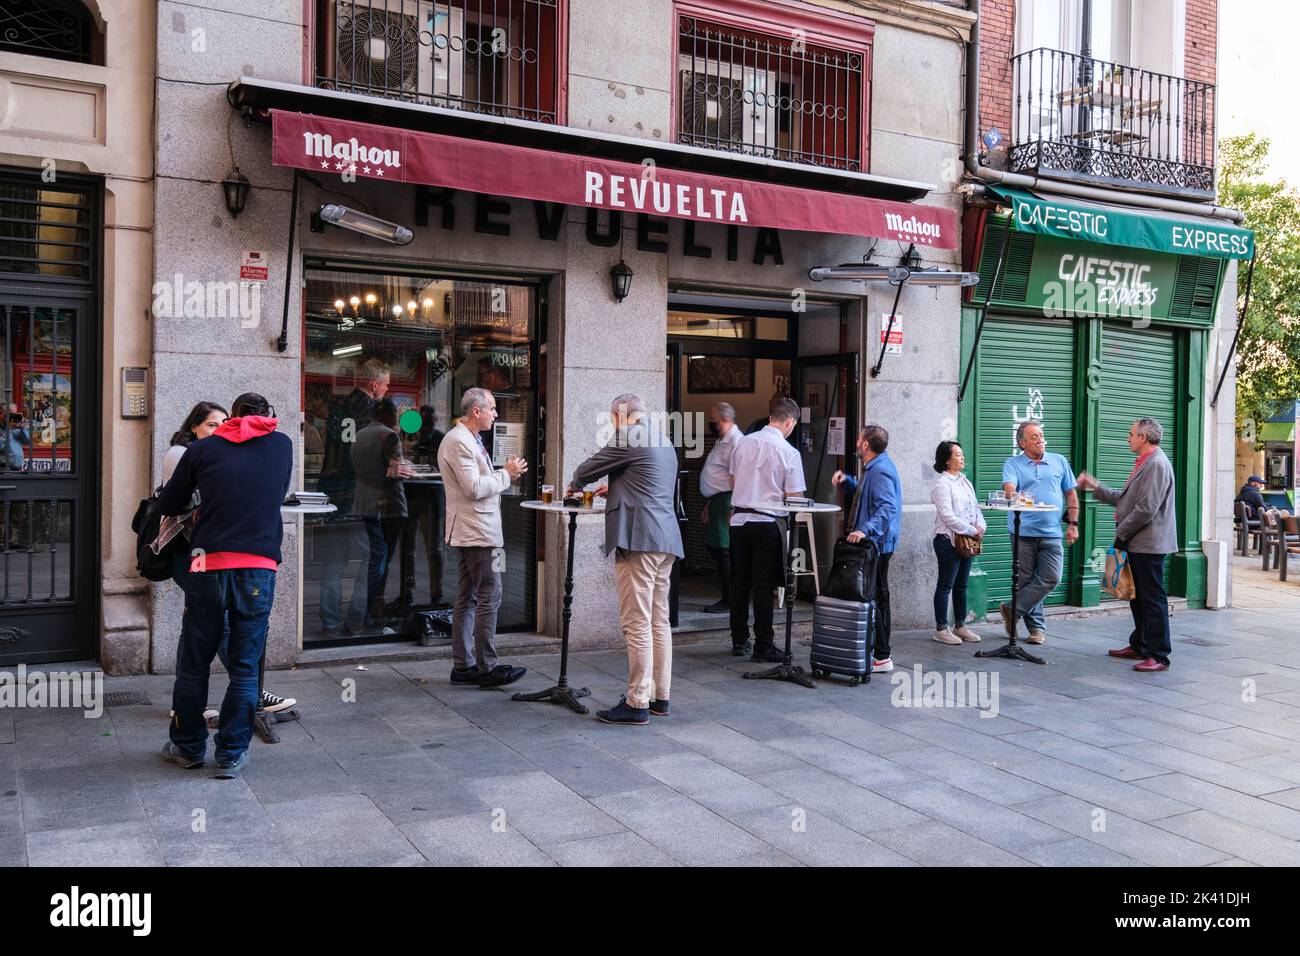 Spain, Madrid. Outdoor Cafe. Stock Photo